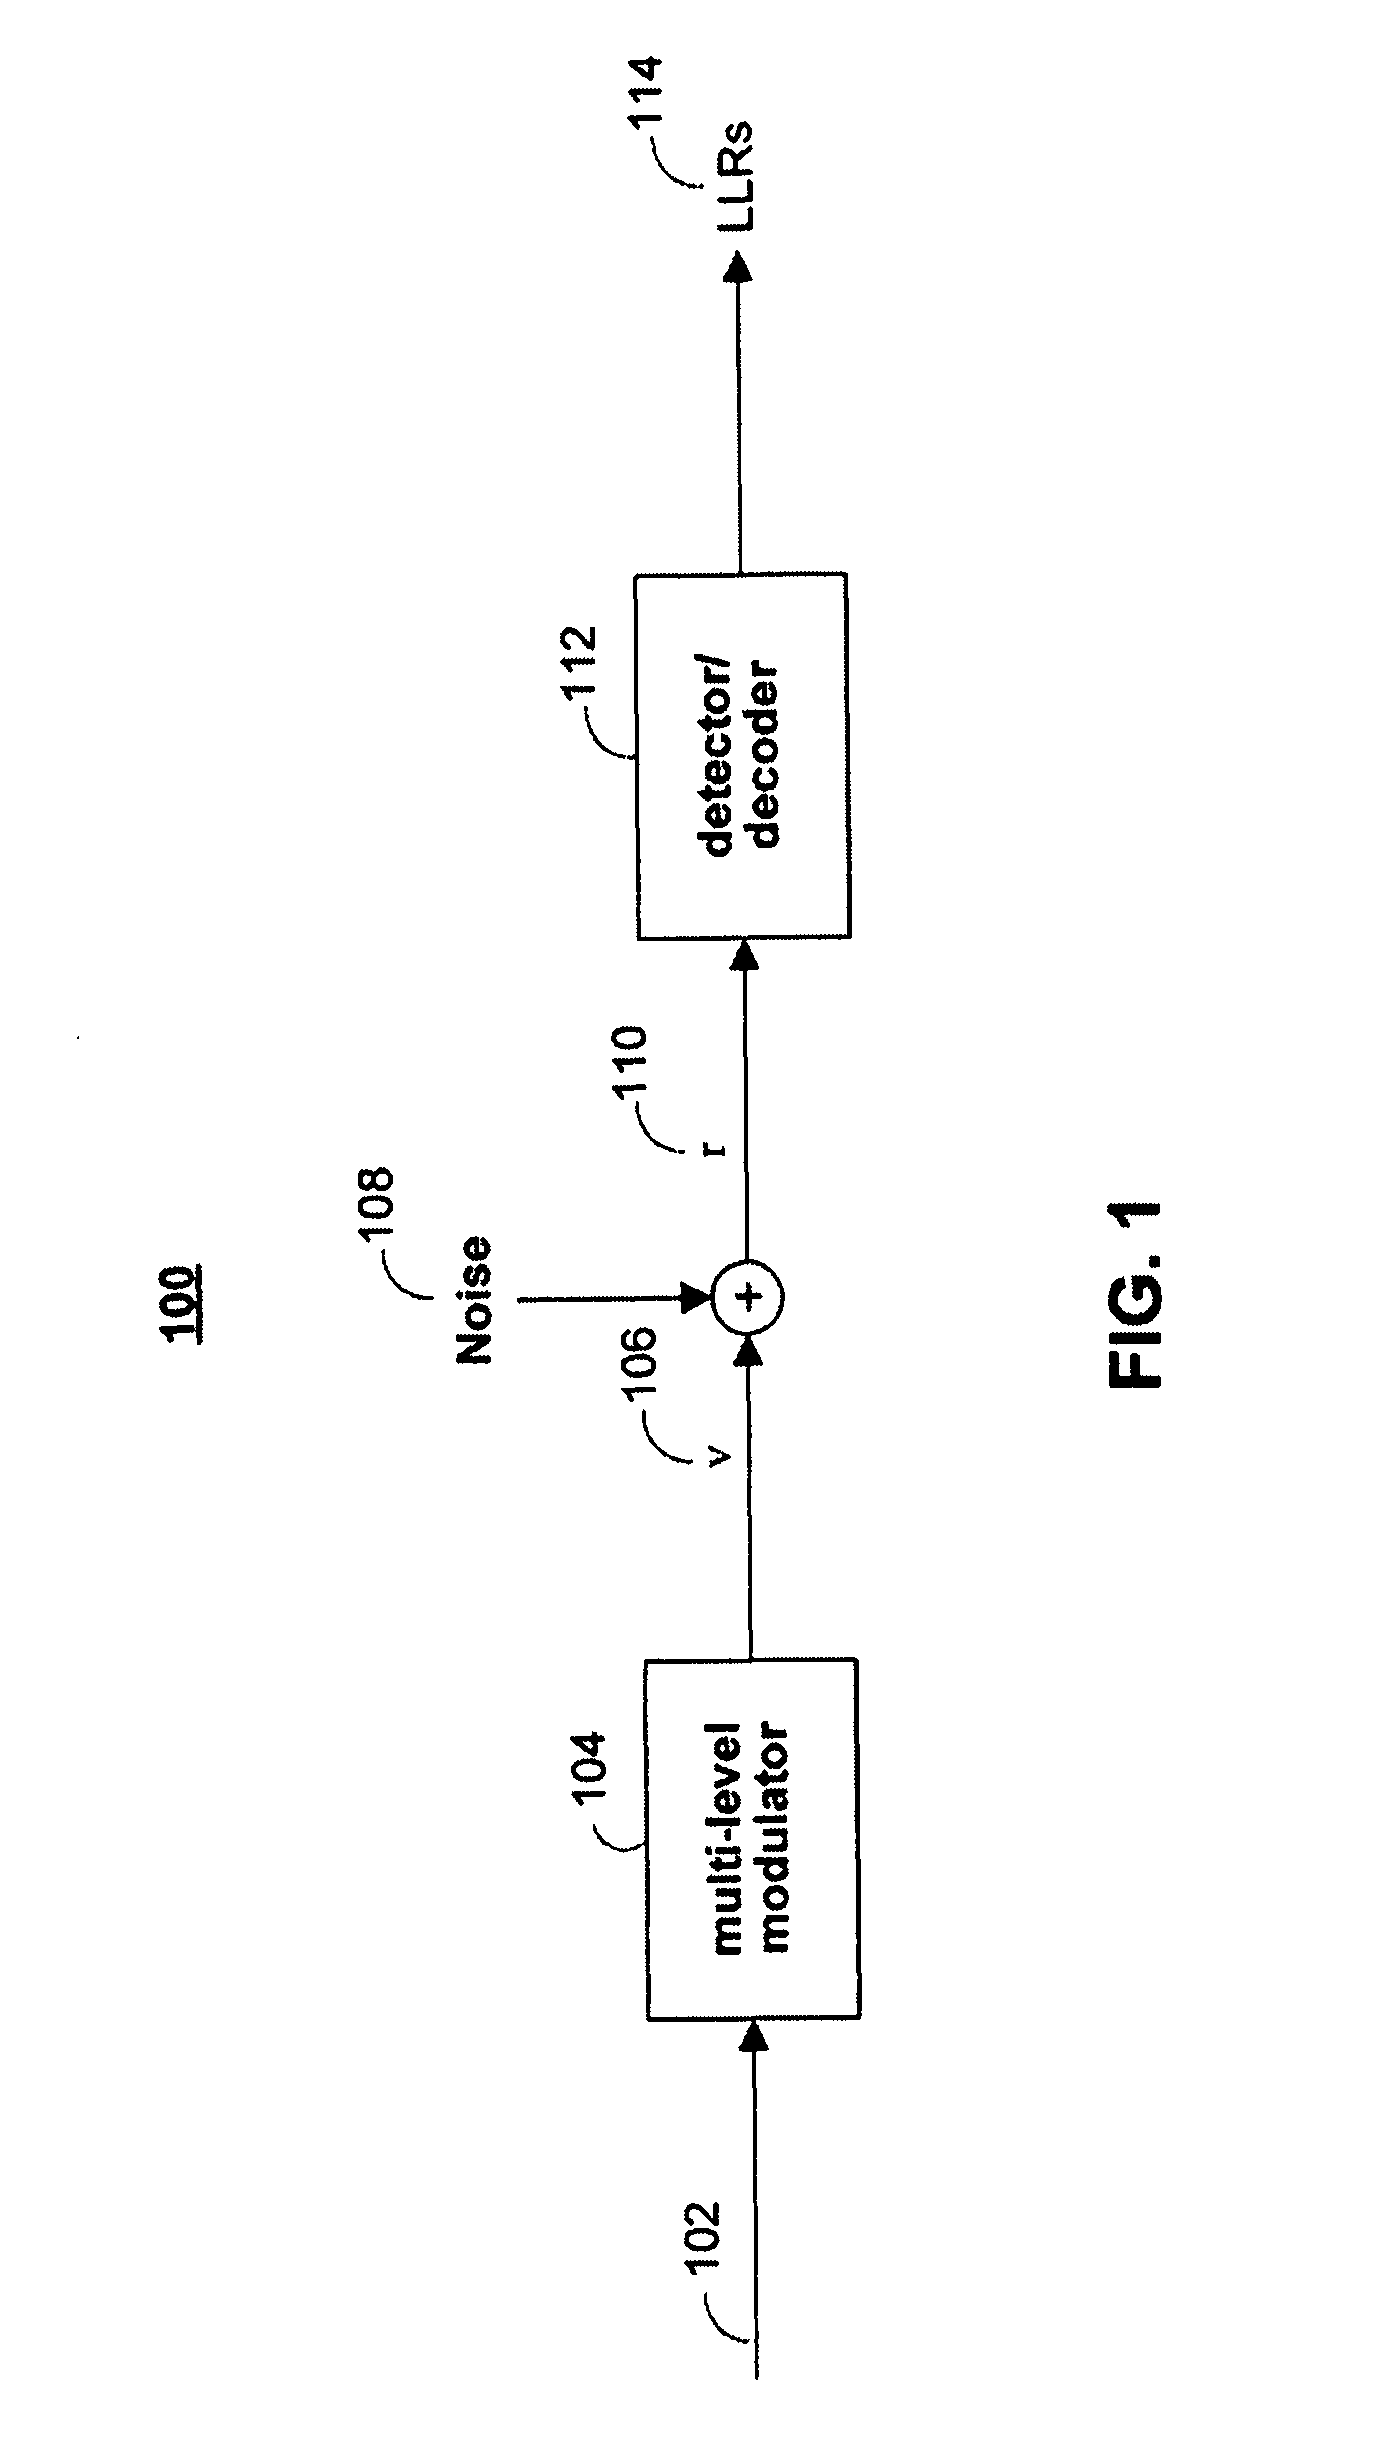 Calculating soft information from a multi-level modulation signal